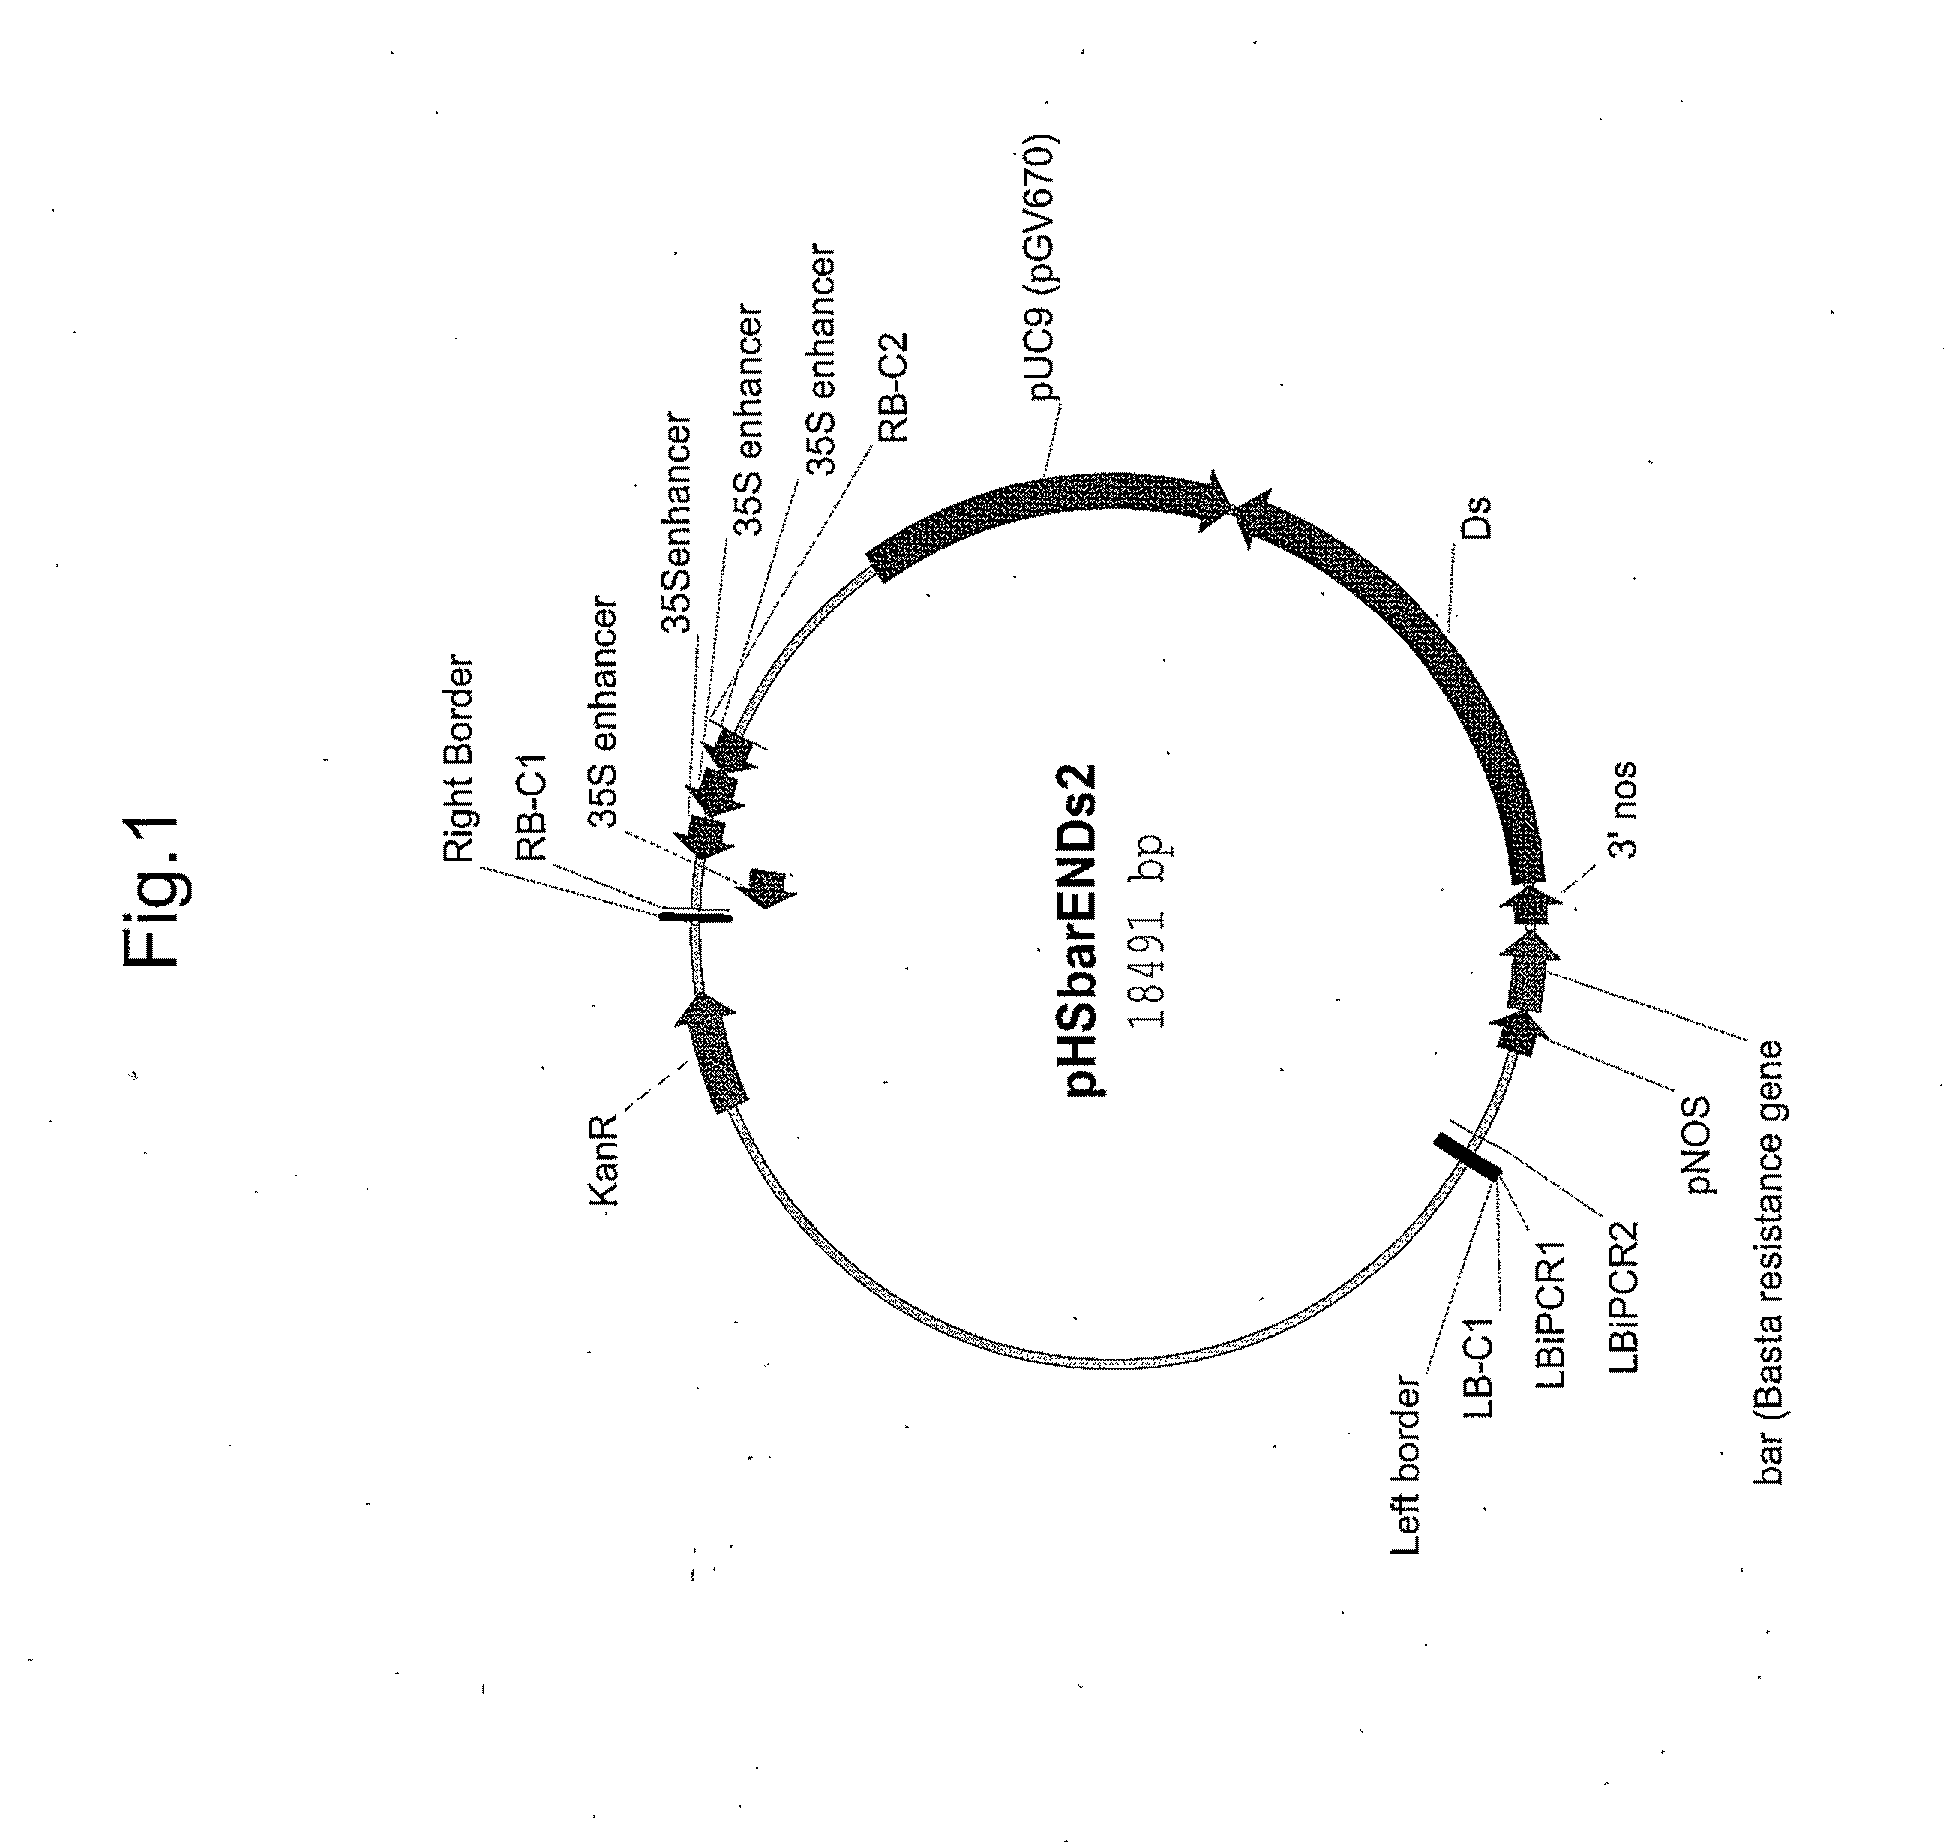 Plants with altered root architecture, related constructs and methods involving genes encoding protein phophatase 2c (PP2C) polypeptides and homologs thereof